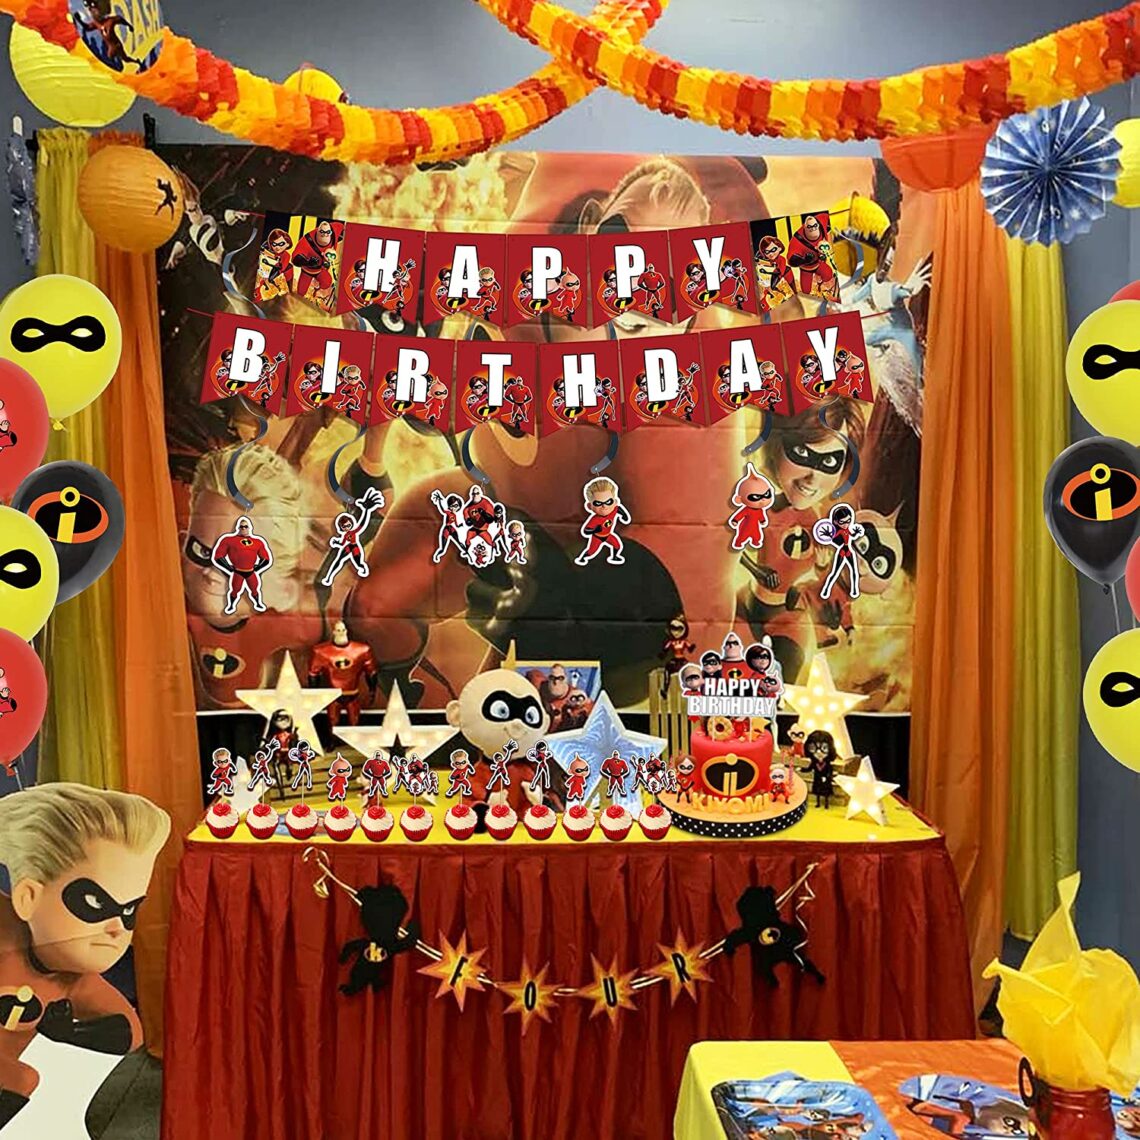 The Incredibles Party Decoration (Credit: Ubuy)